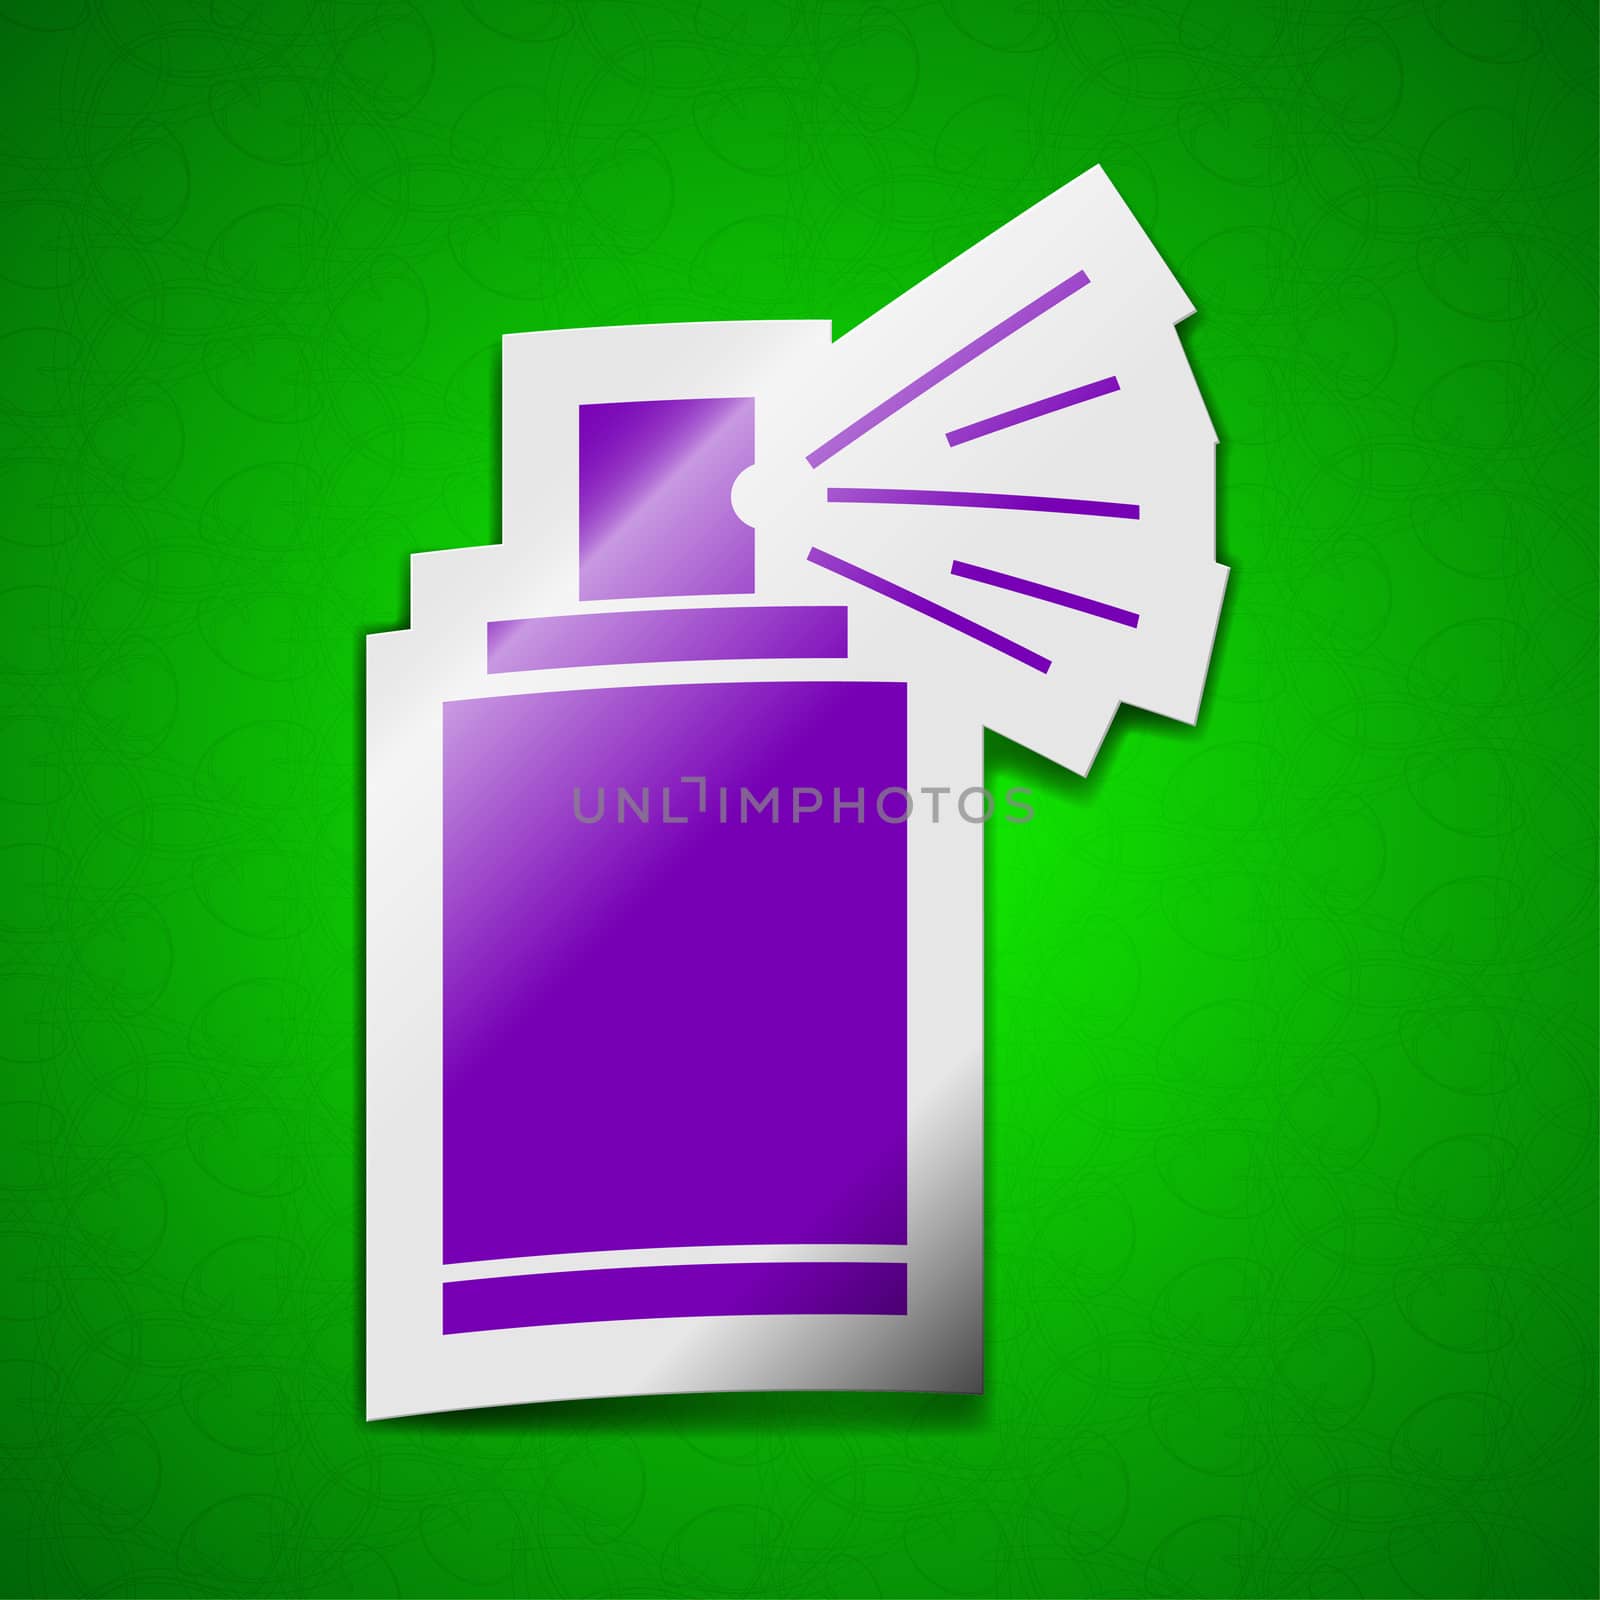 Aerosol paint icon sign. Symbol chic colored sticky label on green background.  illustration